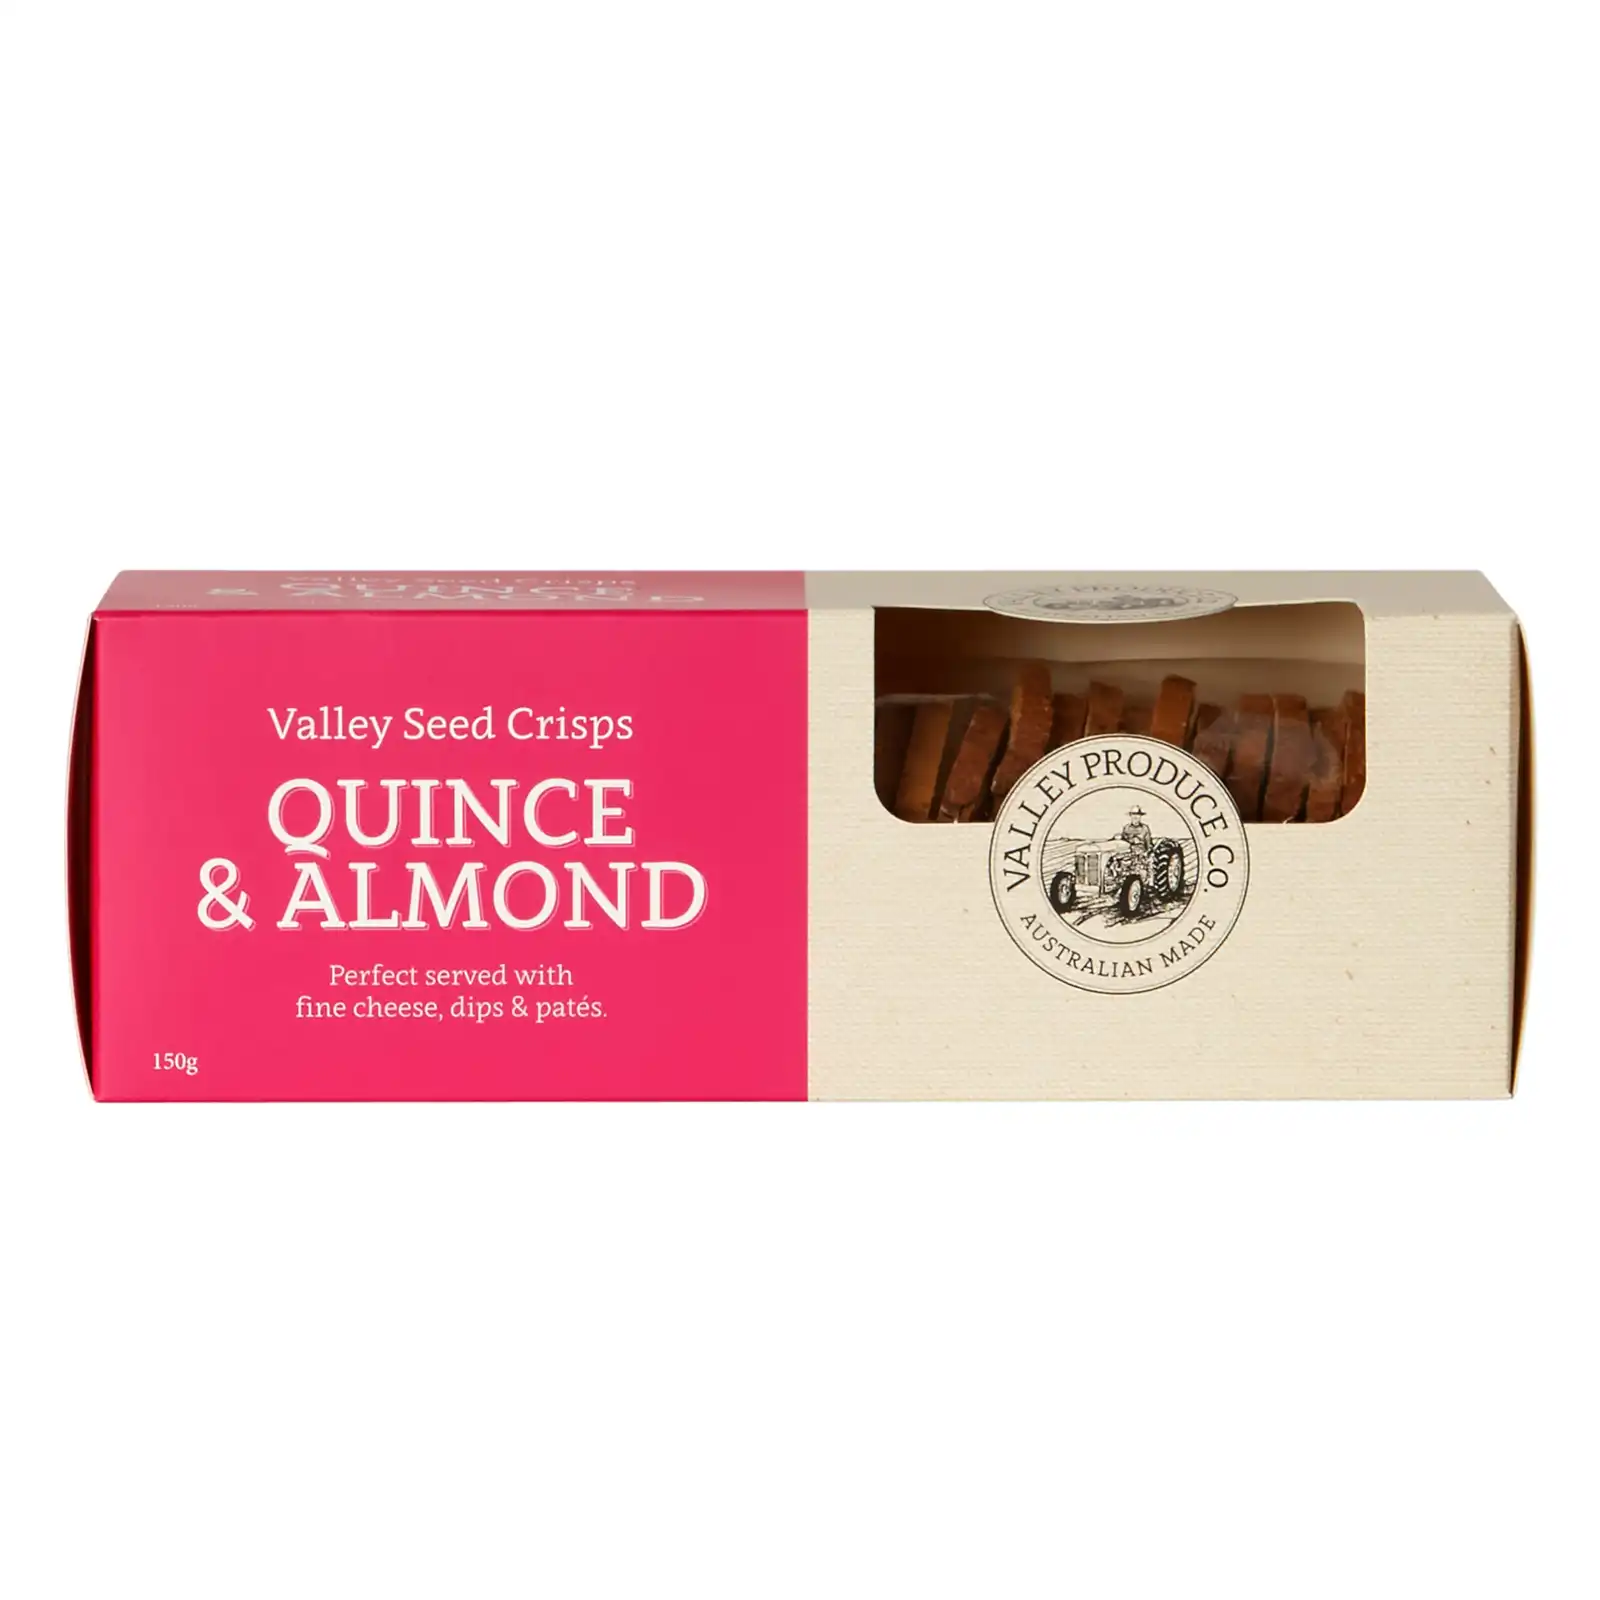 VPC Valley Seed Crisps Quince & Almond 150g